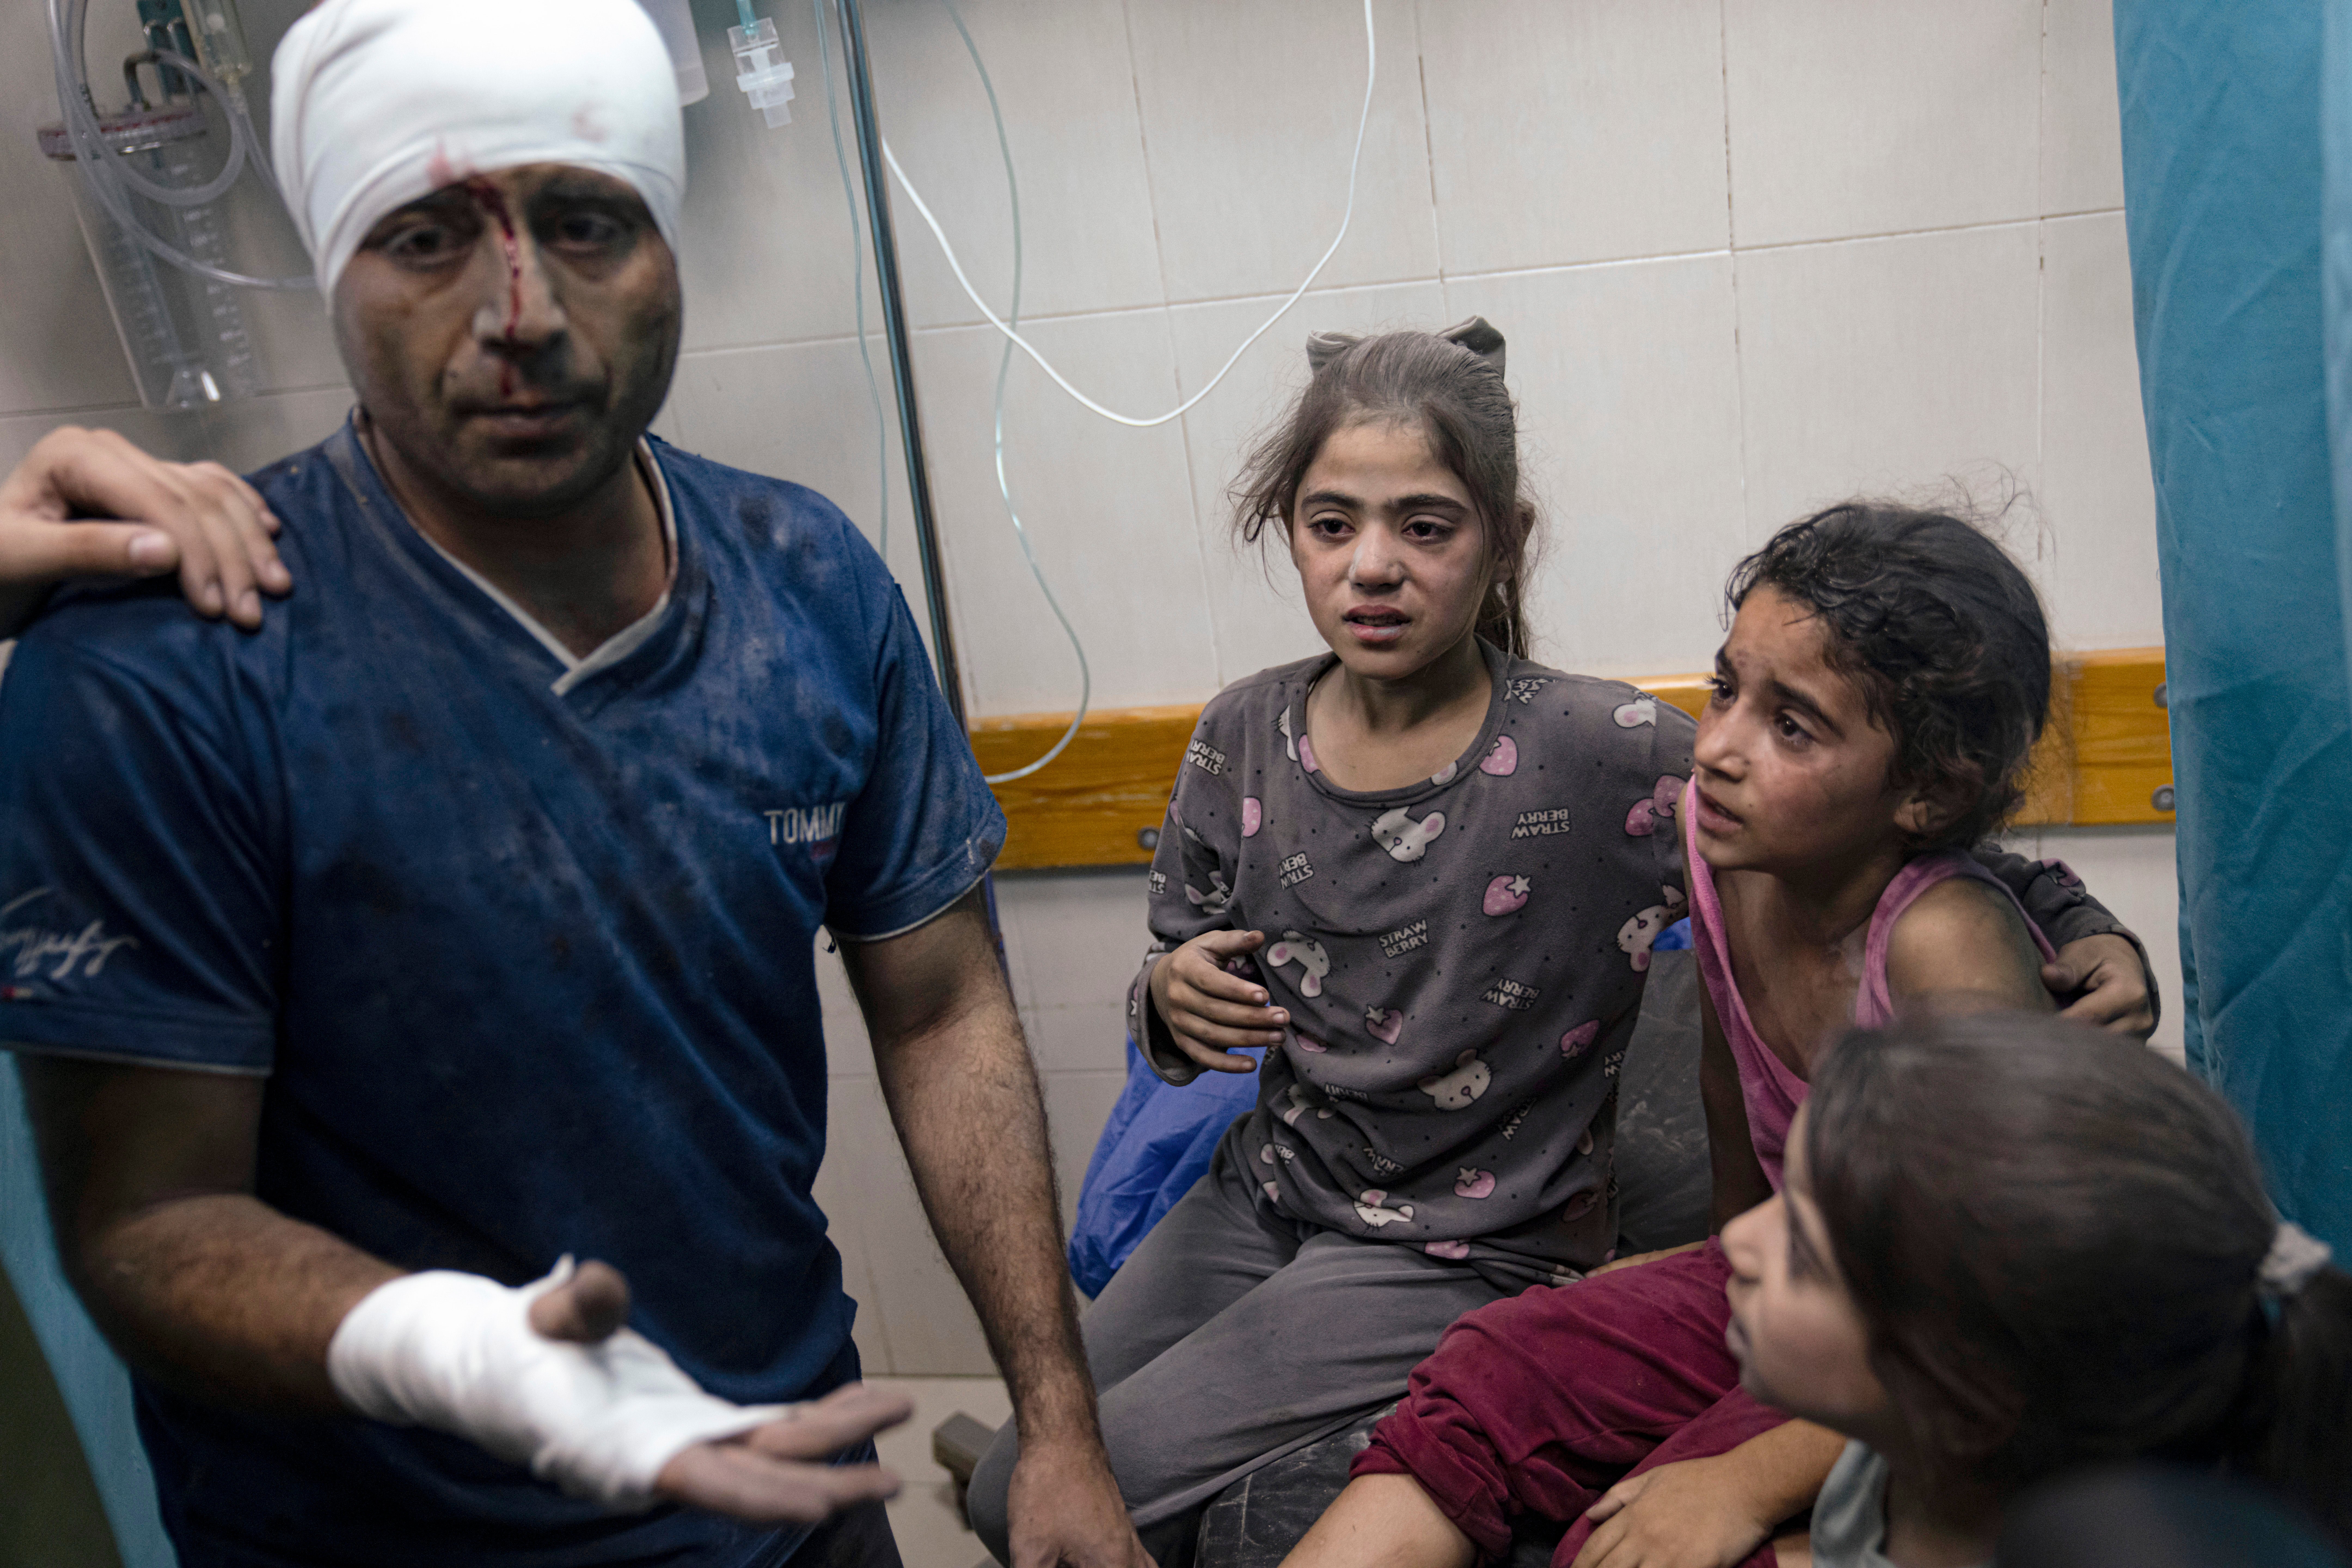 Palestinians wounded in the Israeli bombardment are treated in a hospital in Khan Younis, southern Gaza